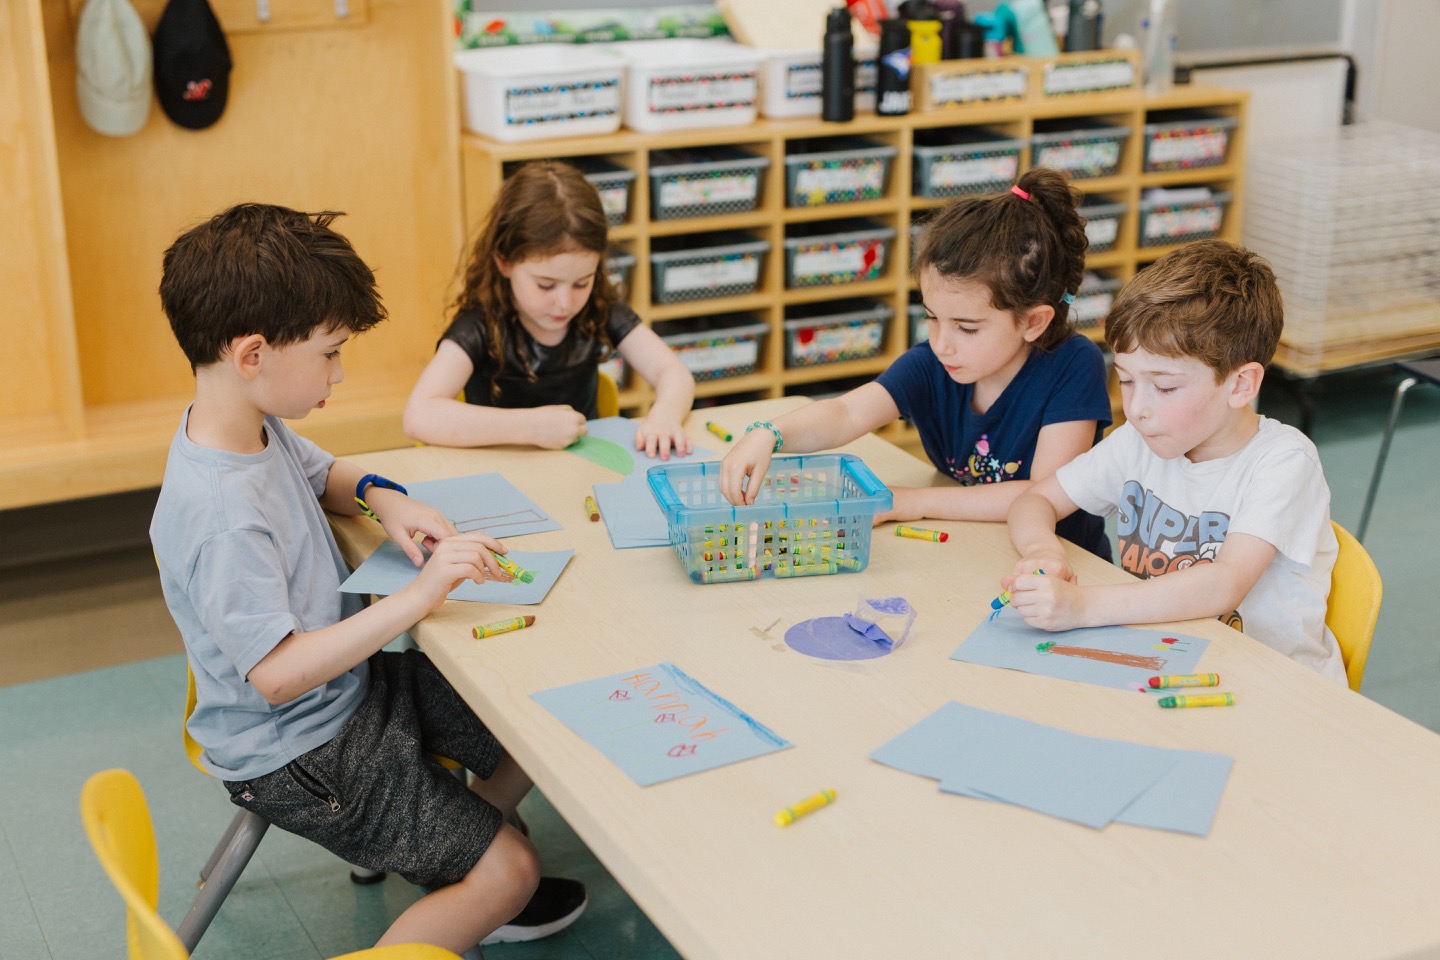 A group of 4 young students are sat at the same desk. They are sharing a basket of different coloured crayons and each drawing on a blue piece of paper.